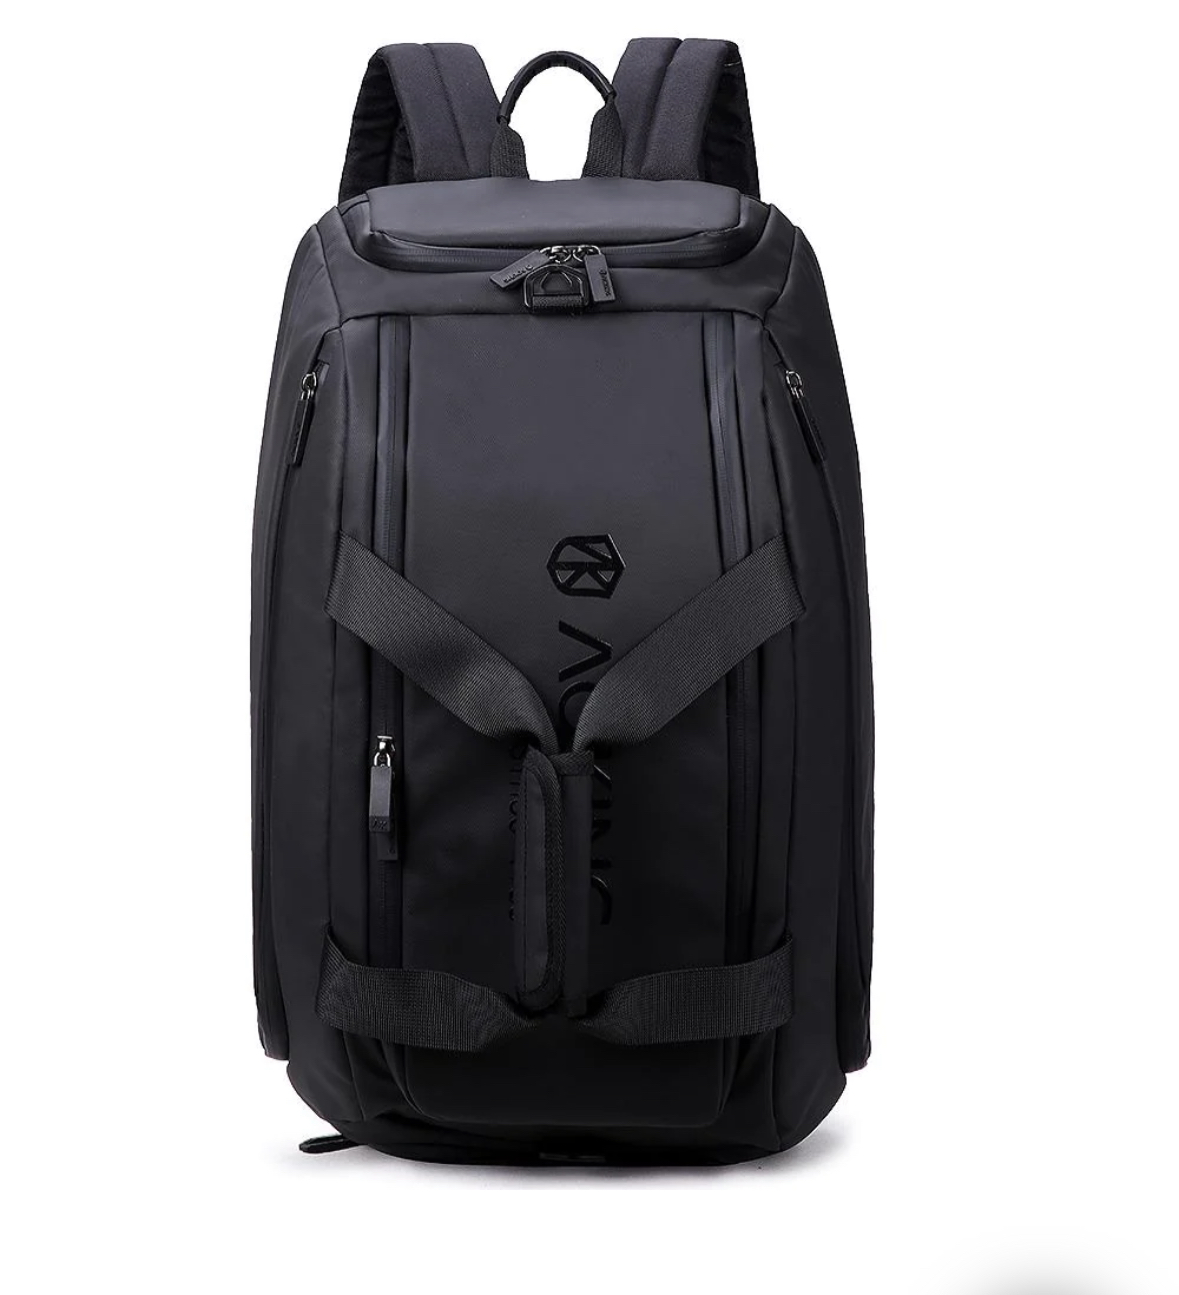 Aoking 32L Waterproof Travel Backpack With Shoes Compartment Multiple Duffel Bag Laptop bag SW89016